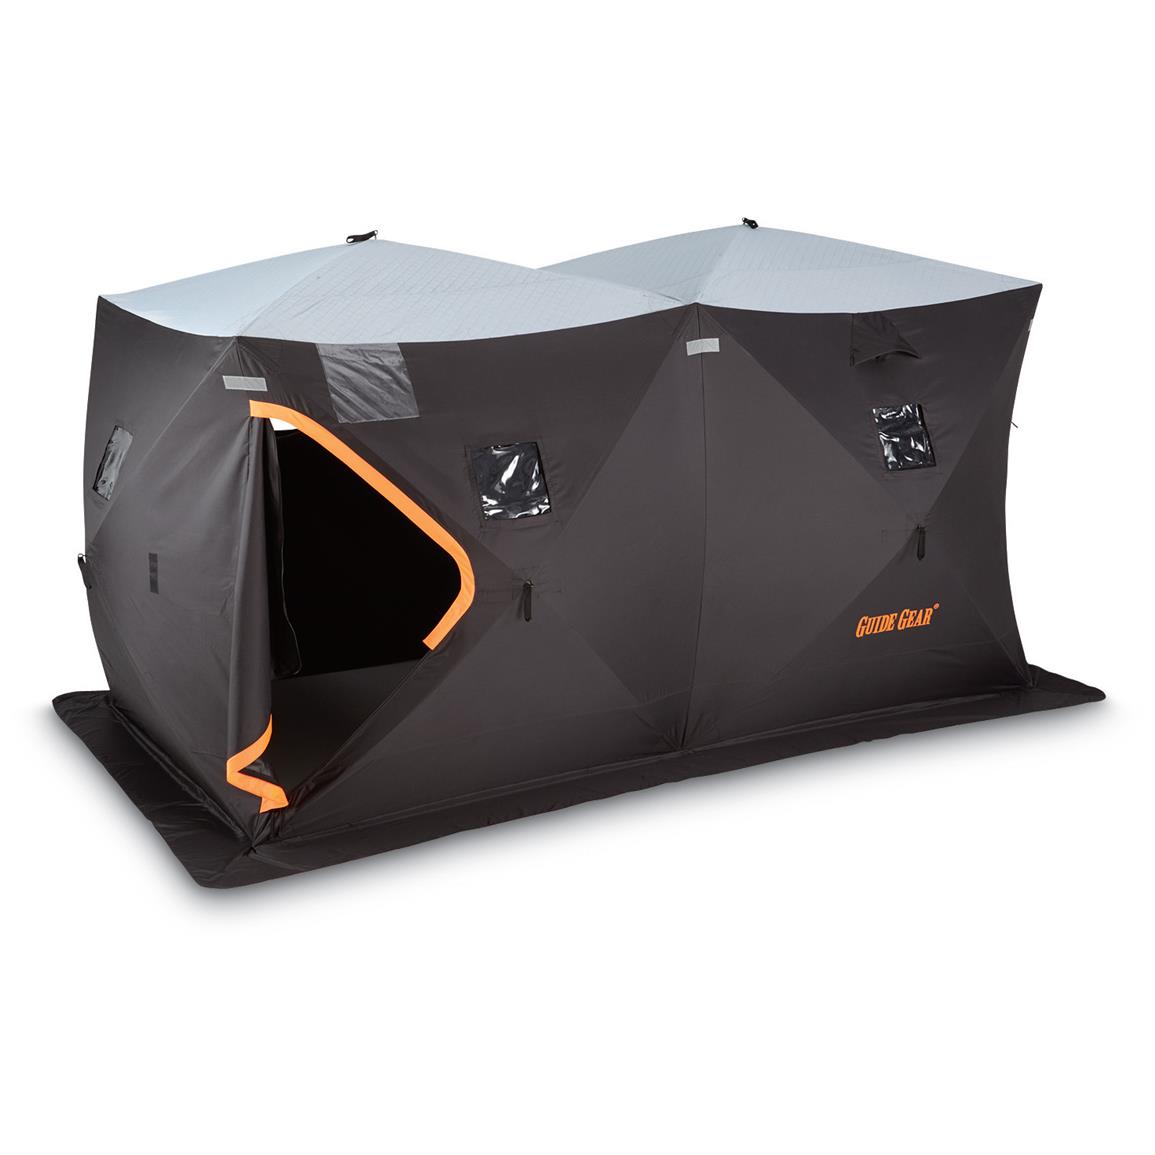 Guide Gear Insulated Ice Fishing Shelter, 6' x 12